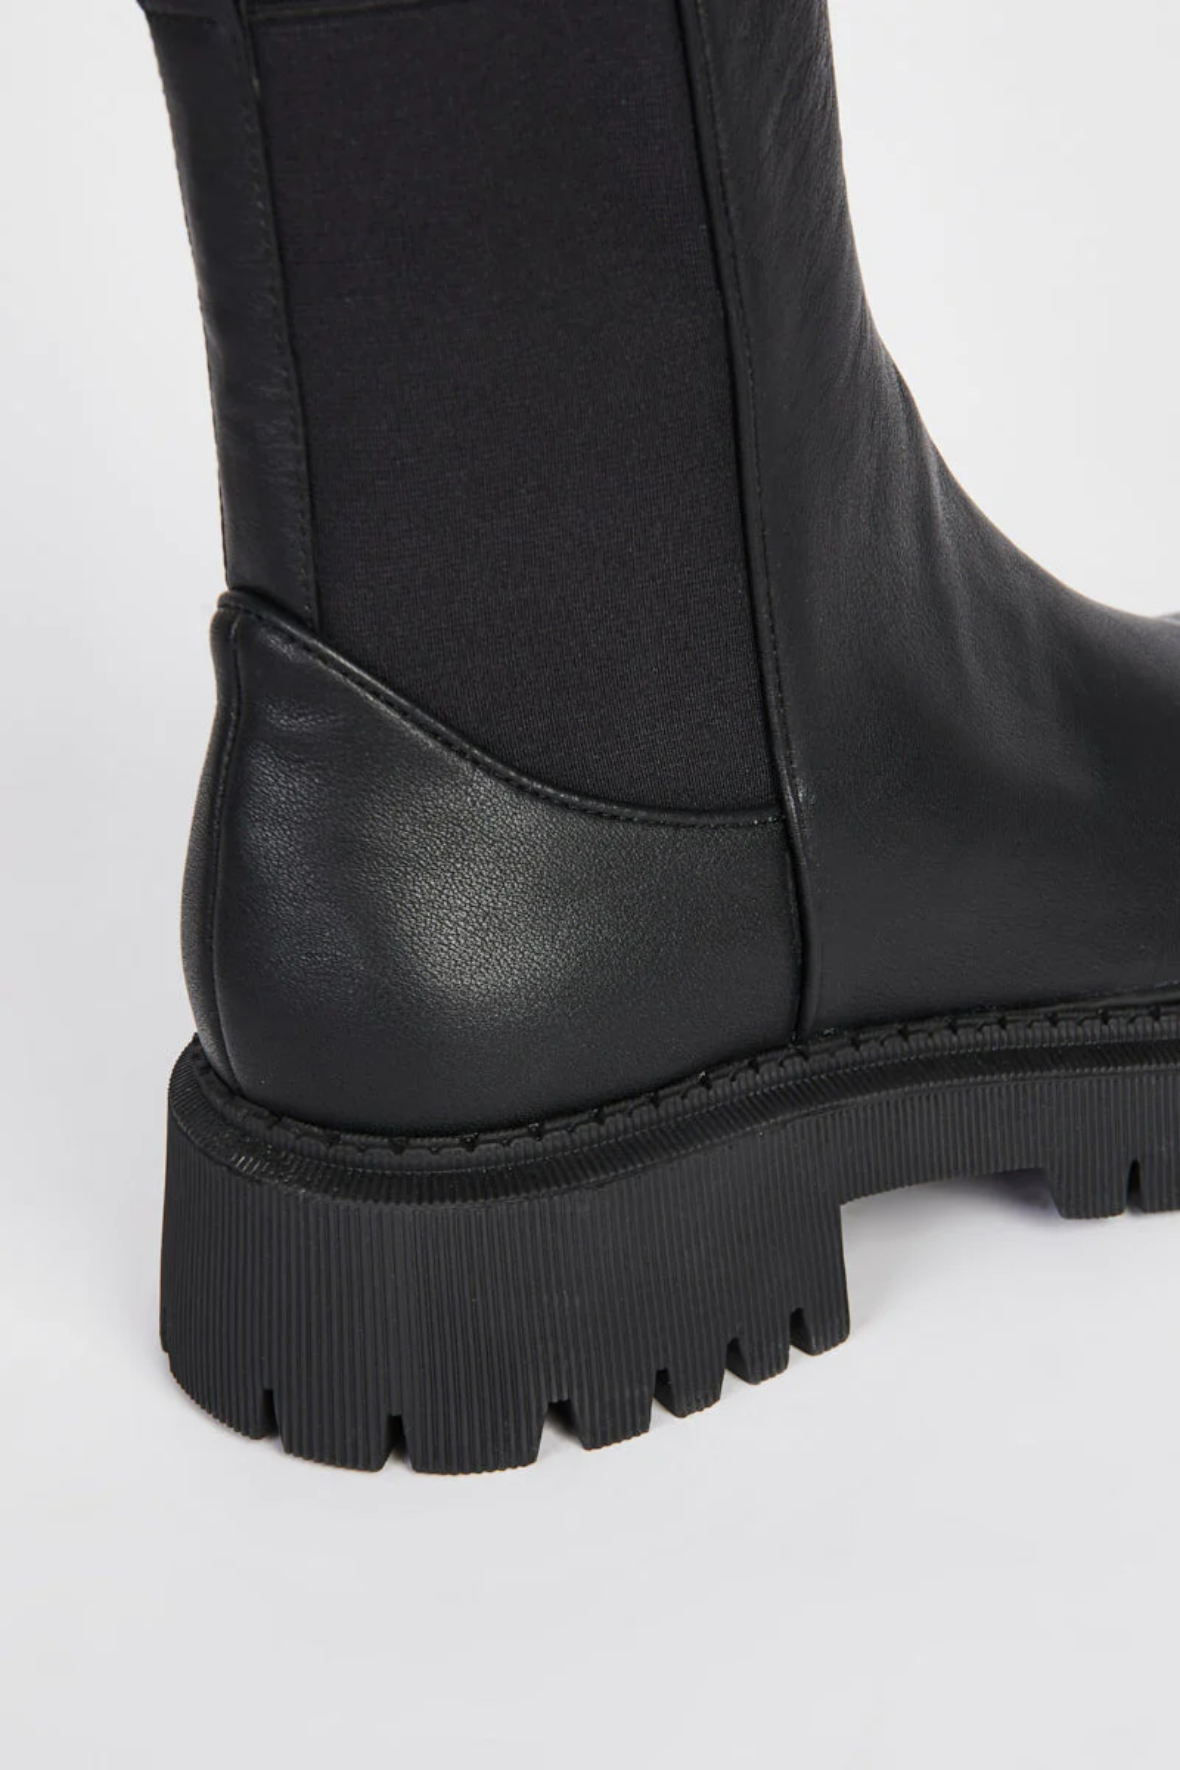 Guided Pull On Boot in Black (vegan) | Intentionally Blank